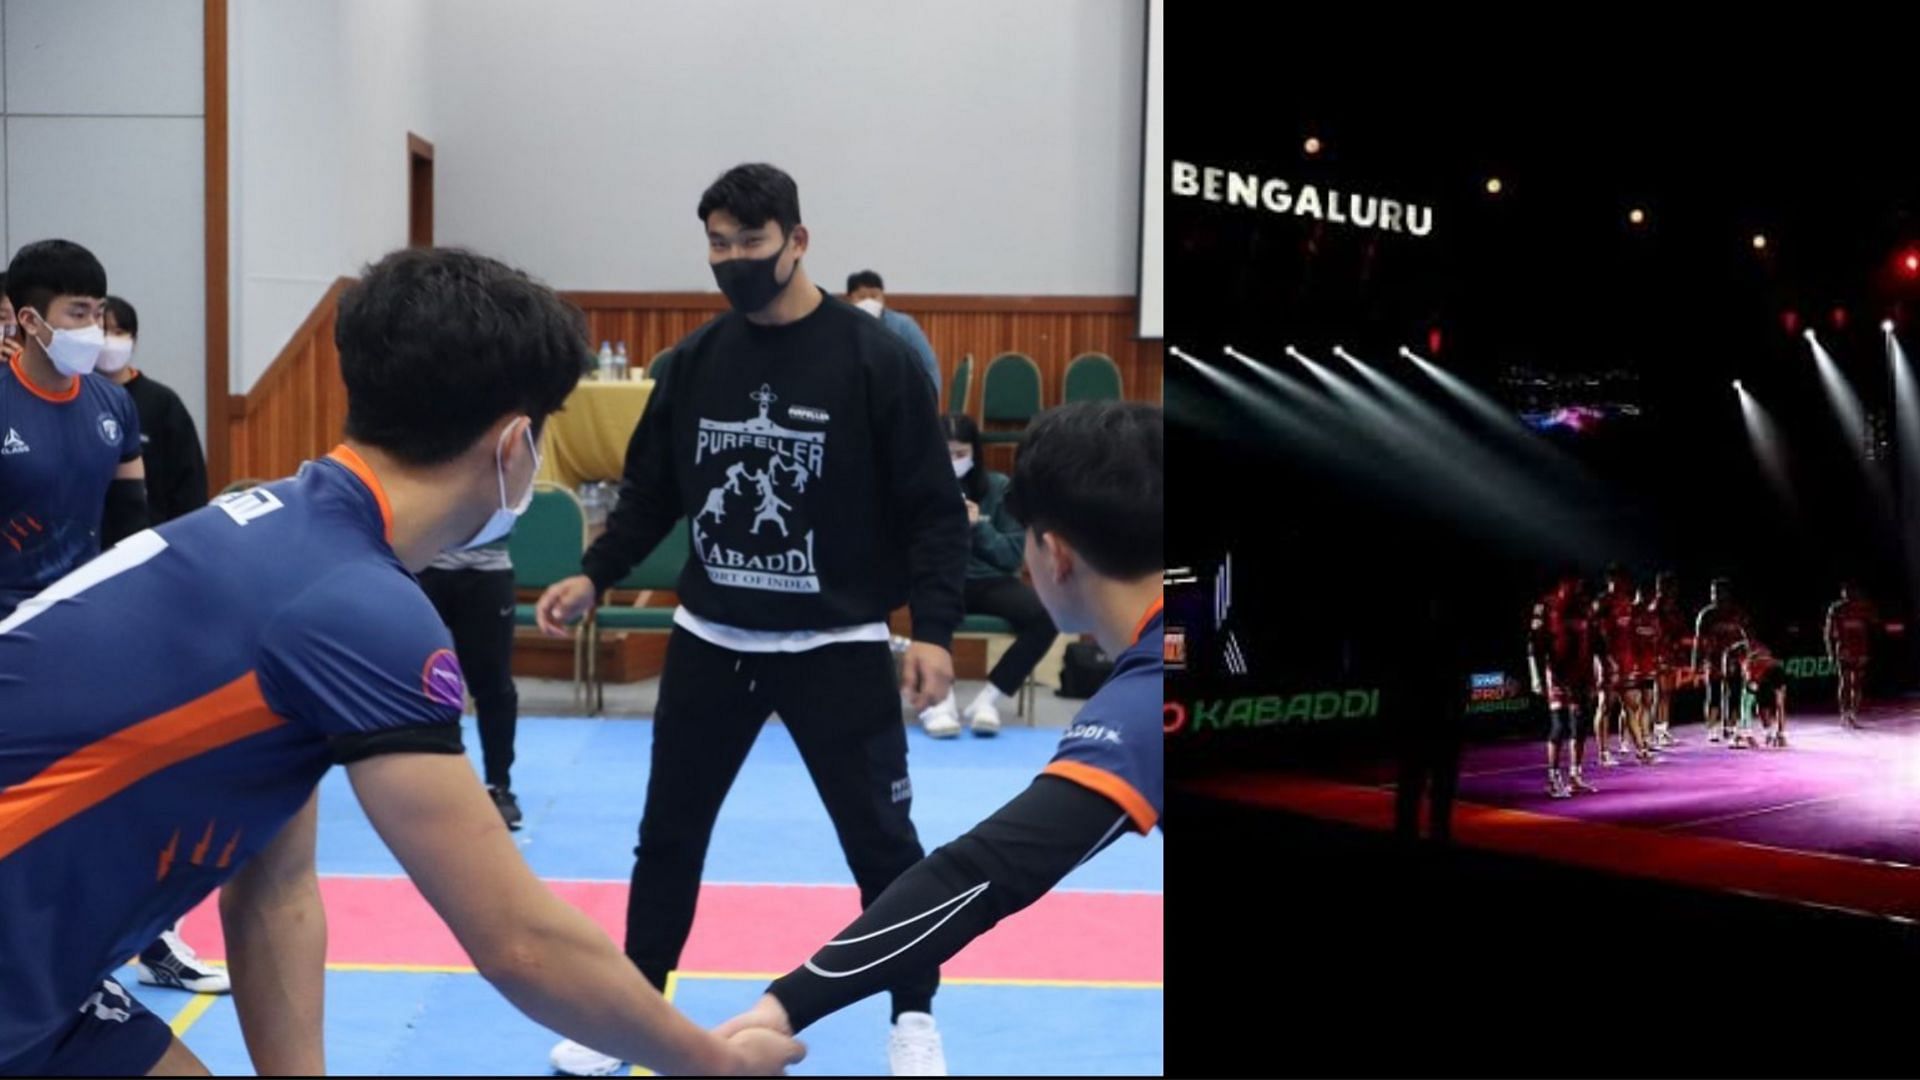 Jang Kun Lee will miss a PKL season for the first time (Left); The entire Pro Kabaddi 2021 will take place in Bengaluru (Right)